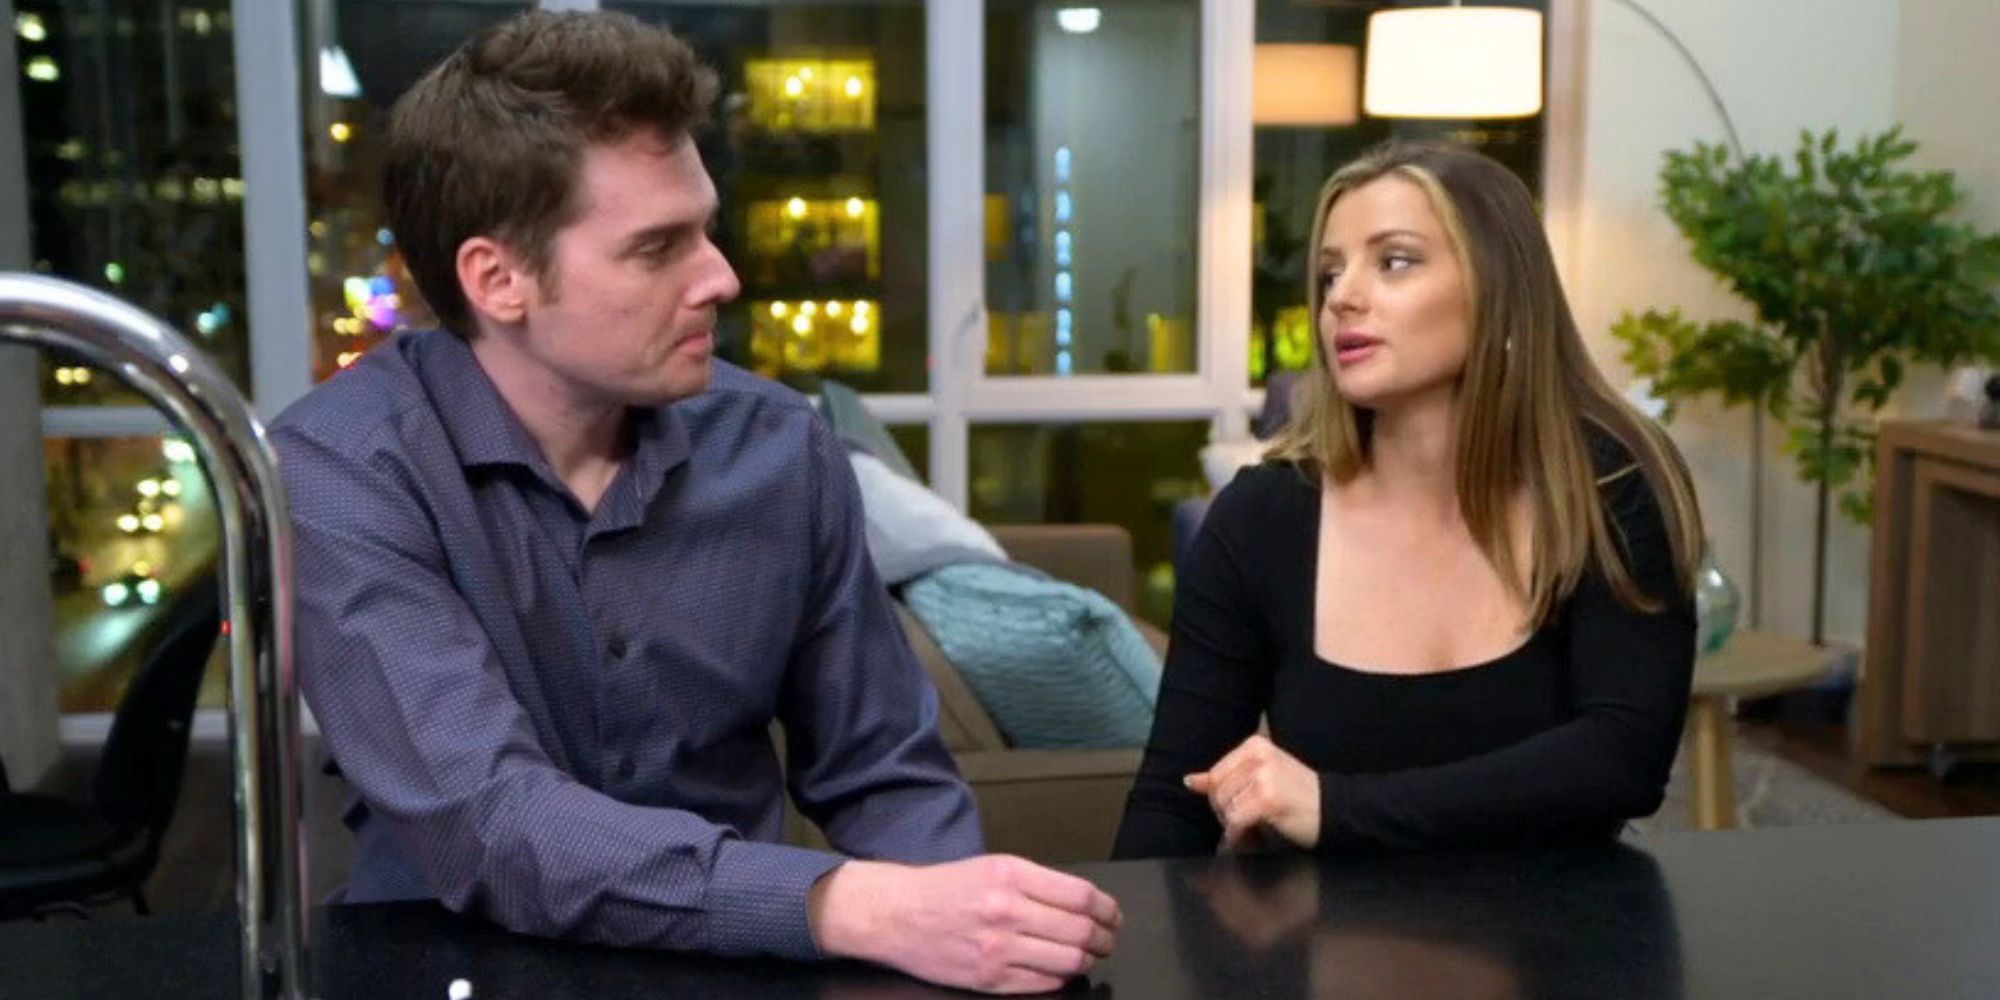 Clare Kerr and Cameron Frazer from Married at First Sight season 17 sitting at kitchen counter talking